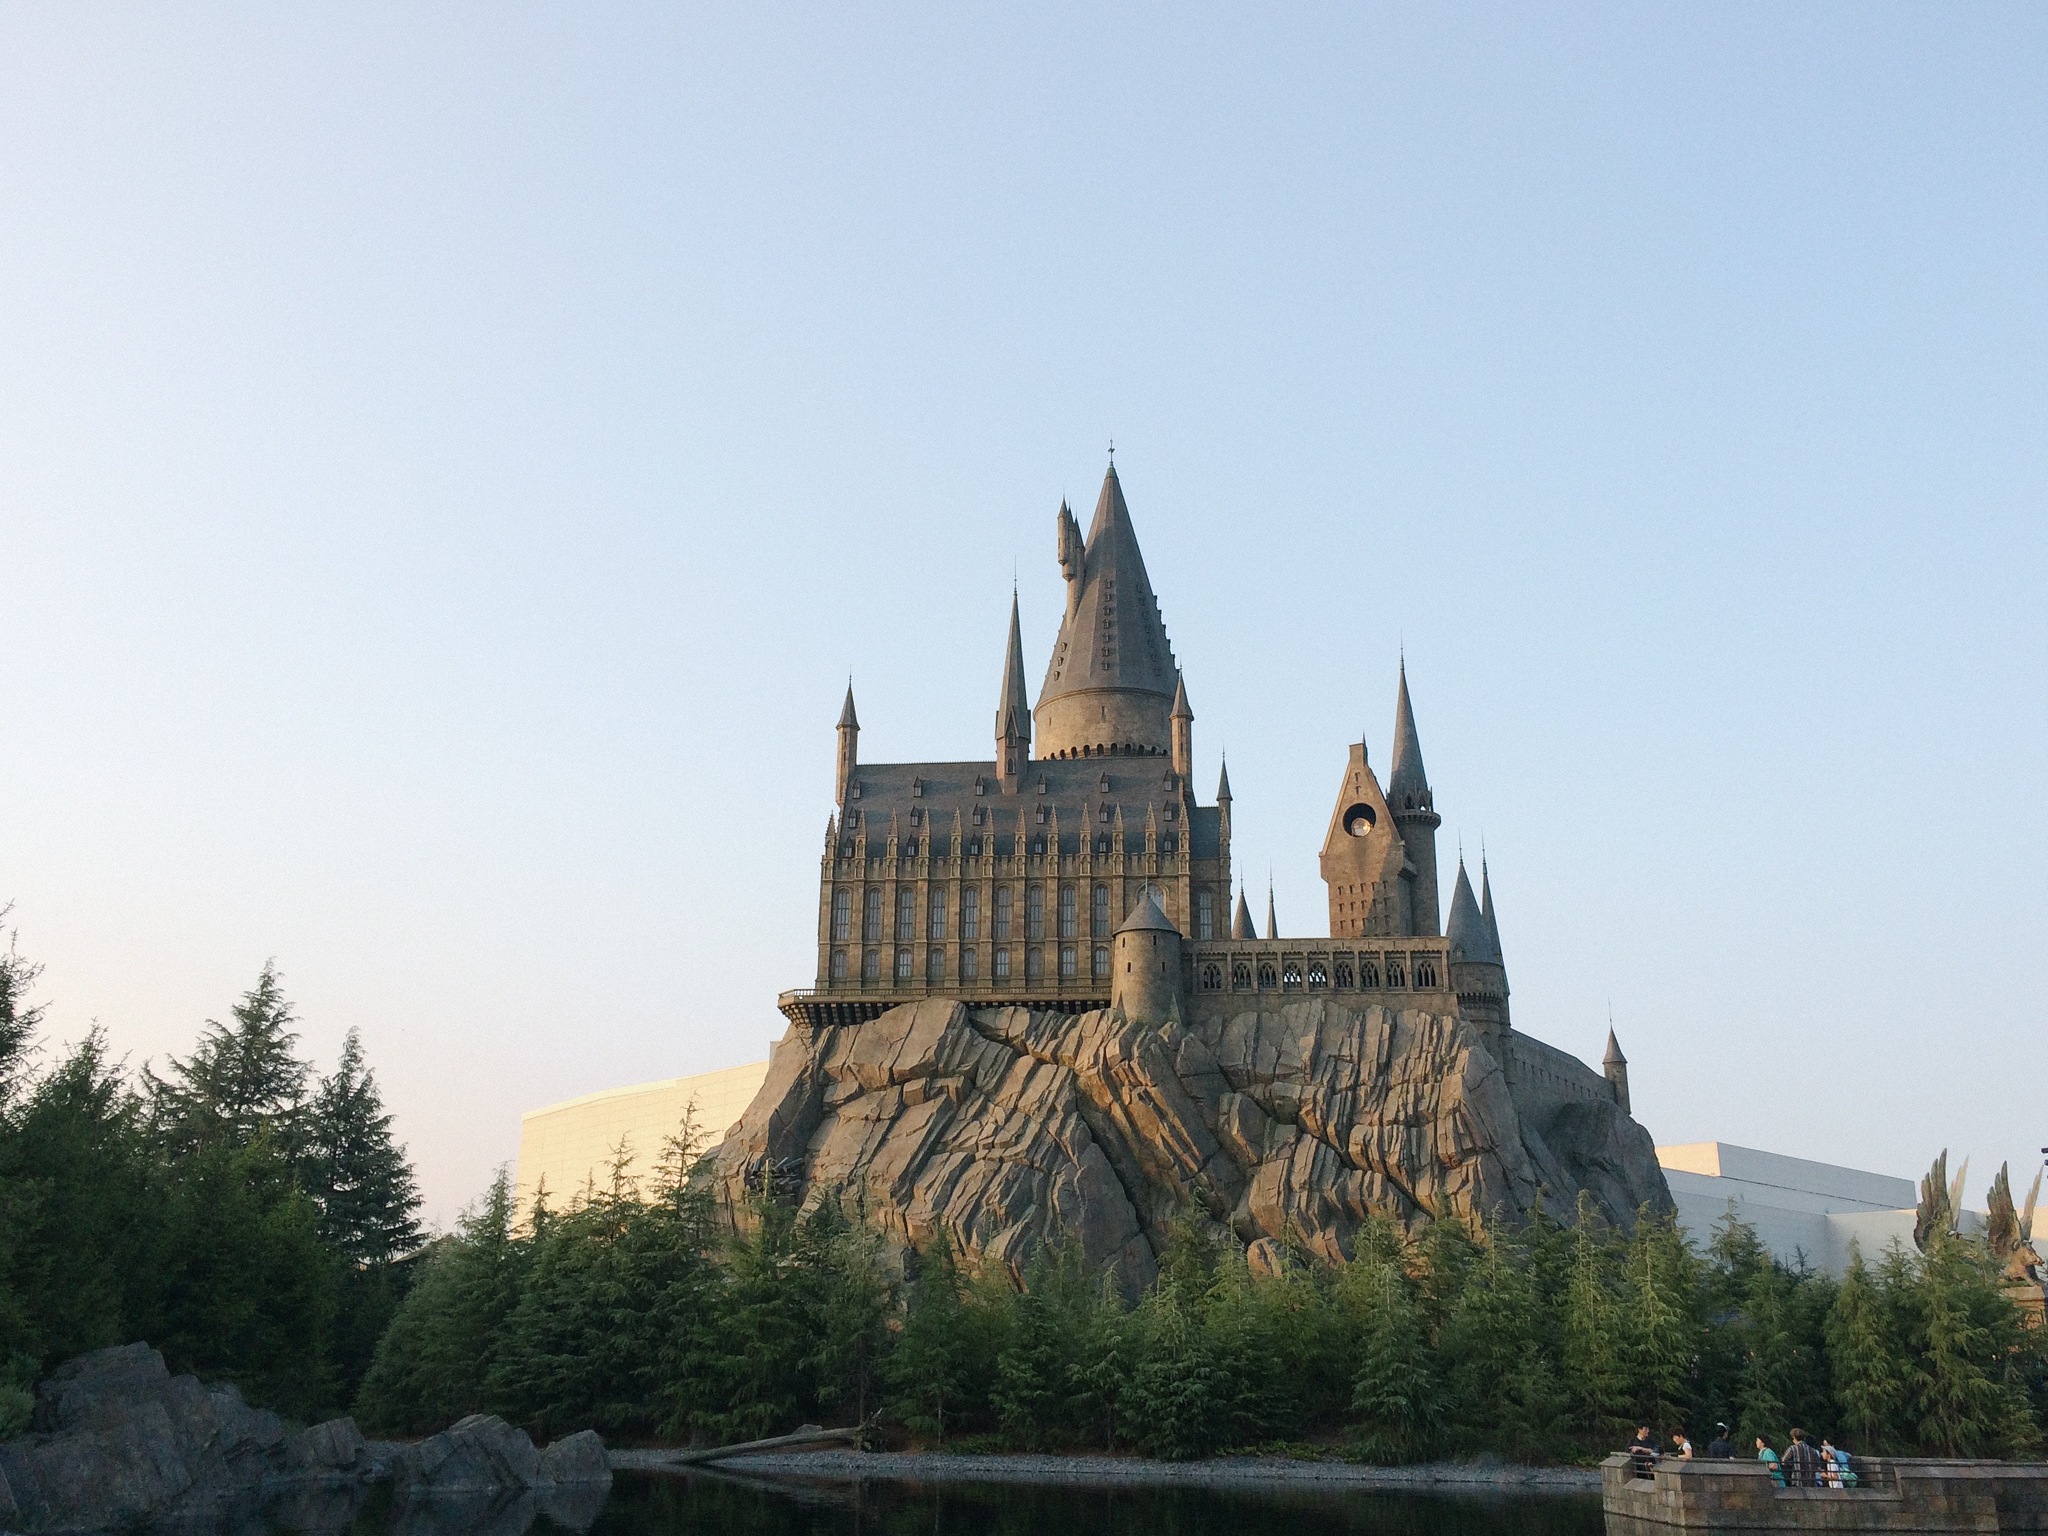 TCHAN! Hogwarts! This was absolutely amazing. 